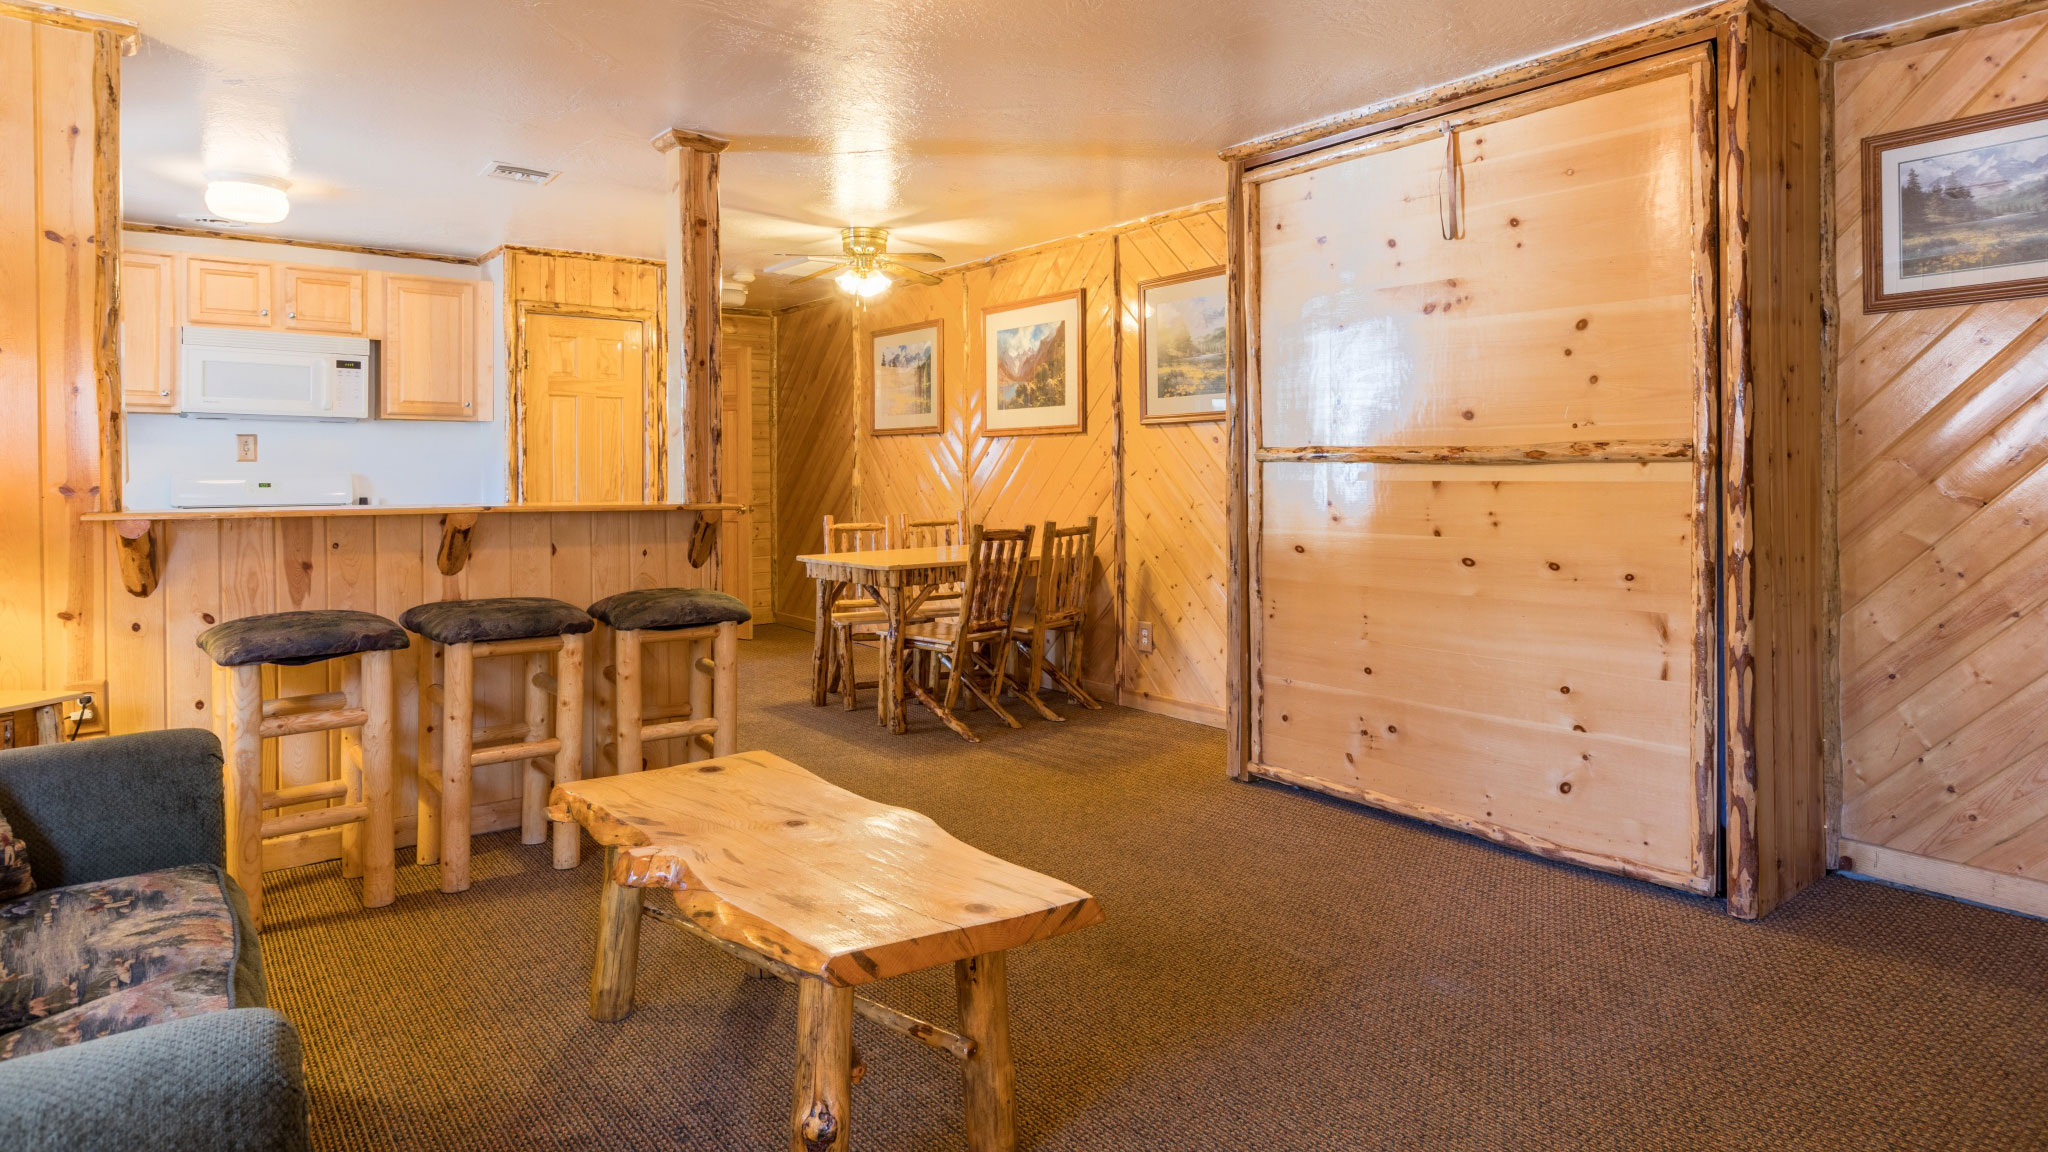 View of a kitchen seating area inside a lodge